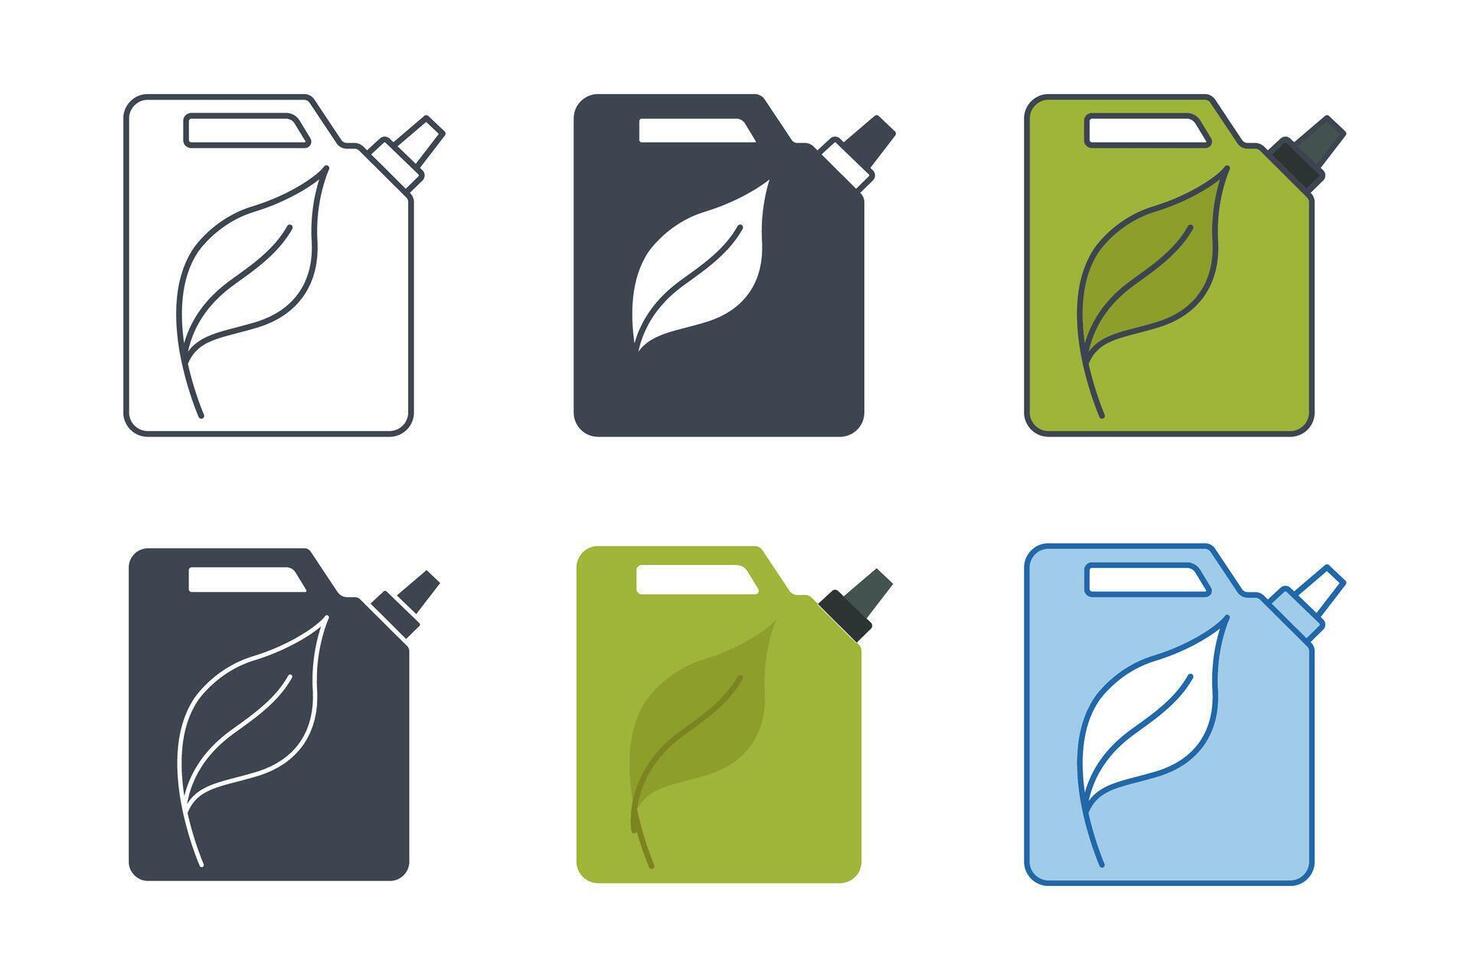 Biofuel canister icons with different styles. Renewable Biofuel symbol vector illustration isolated on white background